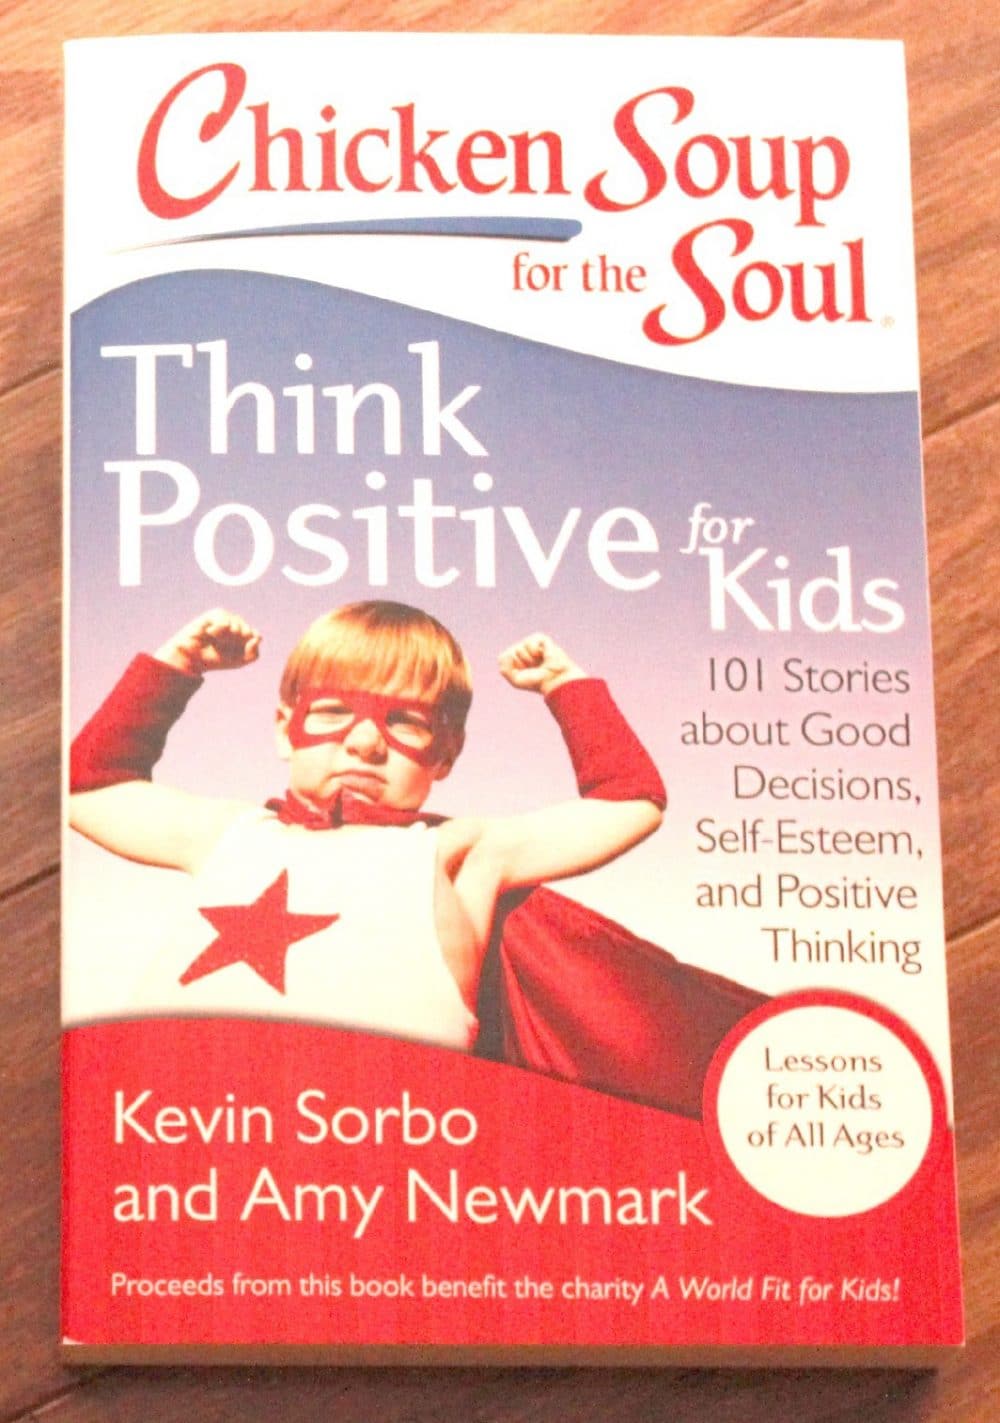 Chicken Soup for the Soul Think Positive for Kids #Giveaway